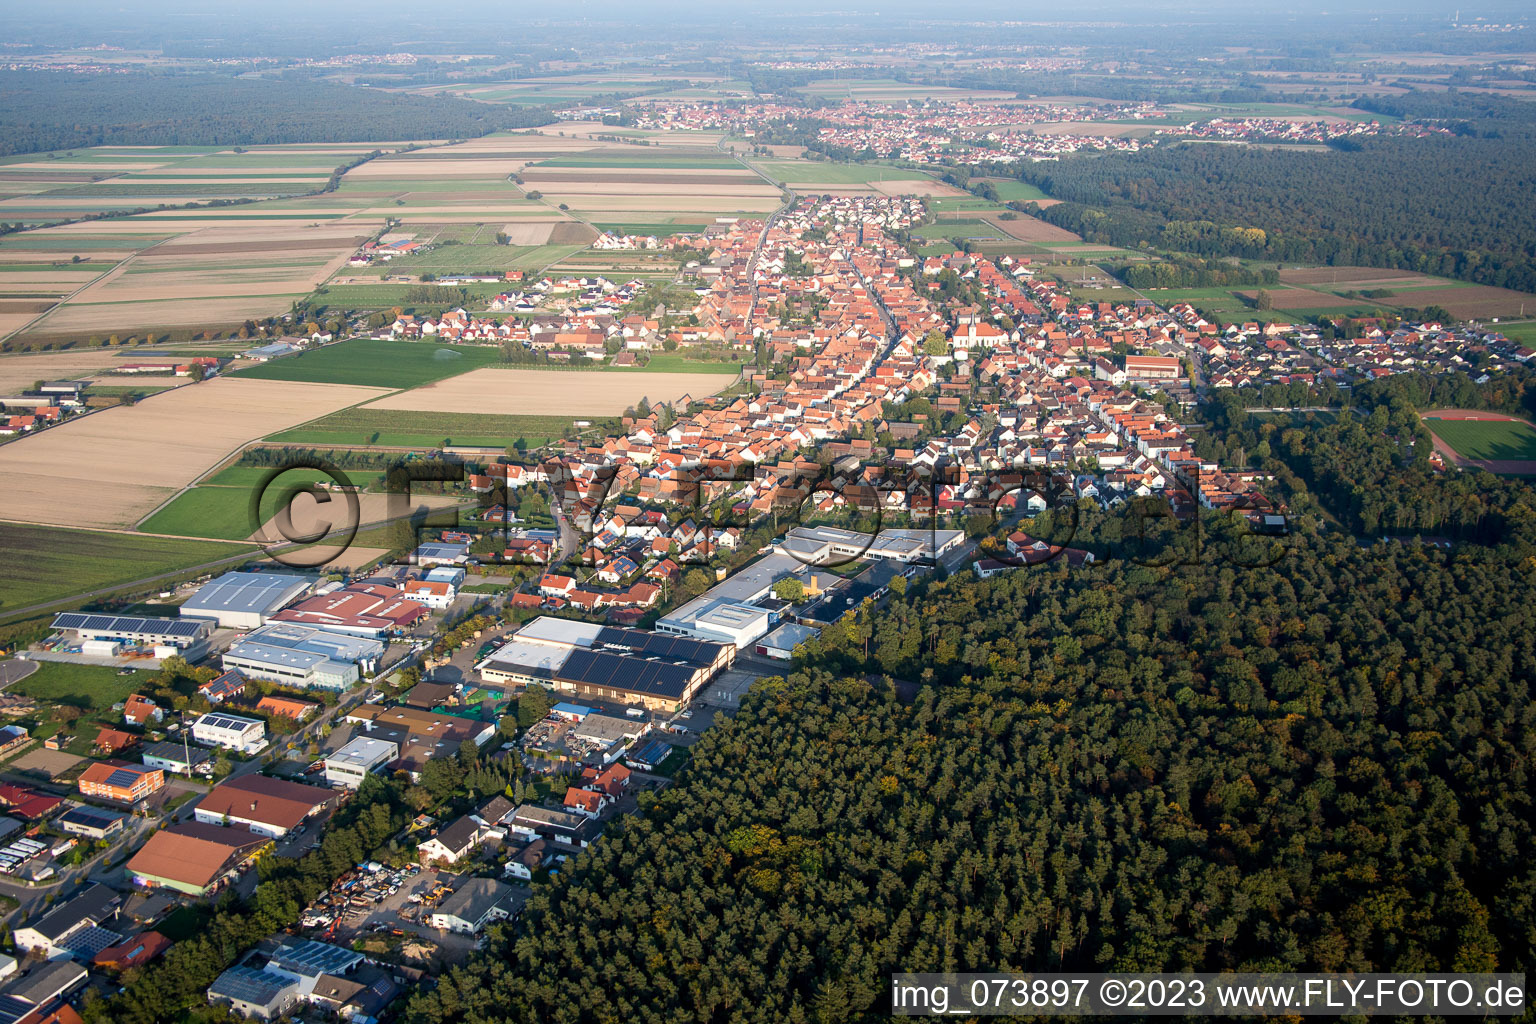 Hatzenbühl in the state Rhineland-Palatinate, Germany viewn from the air